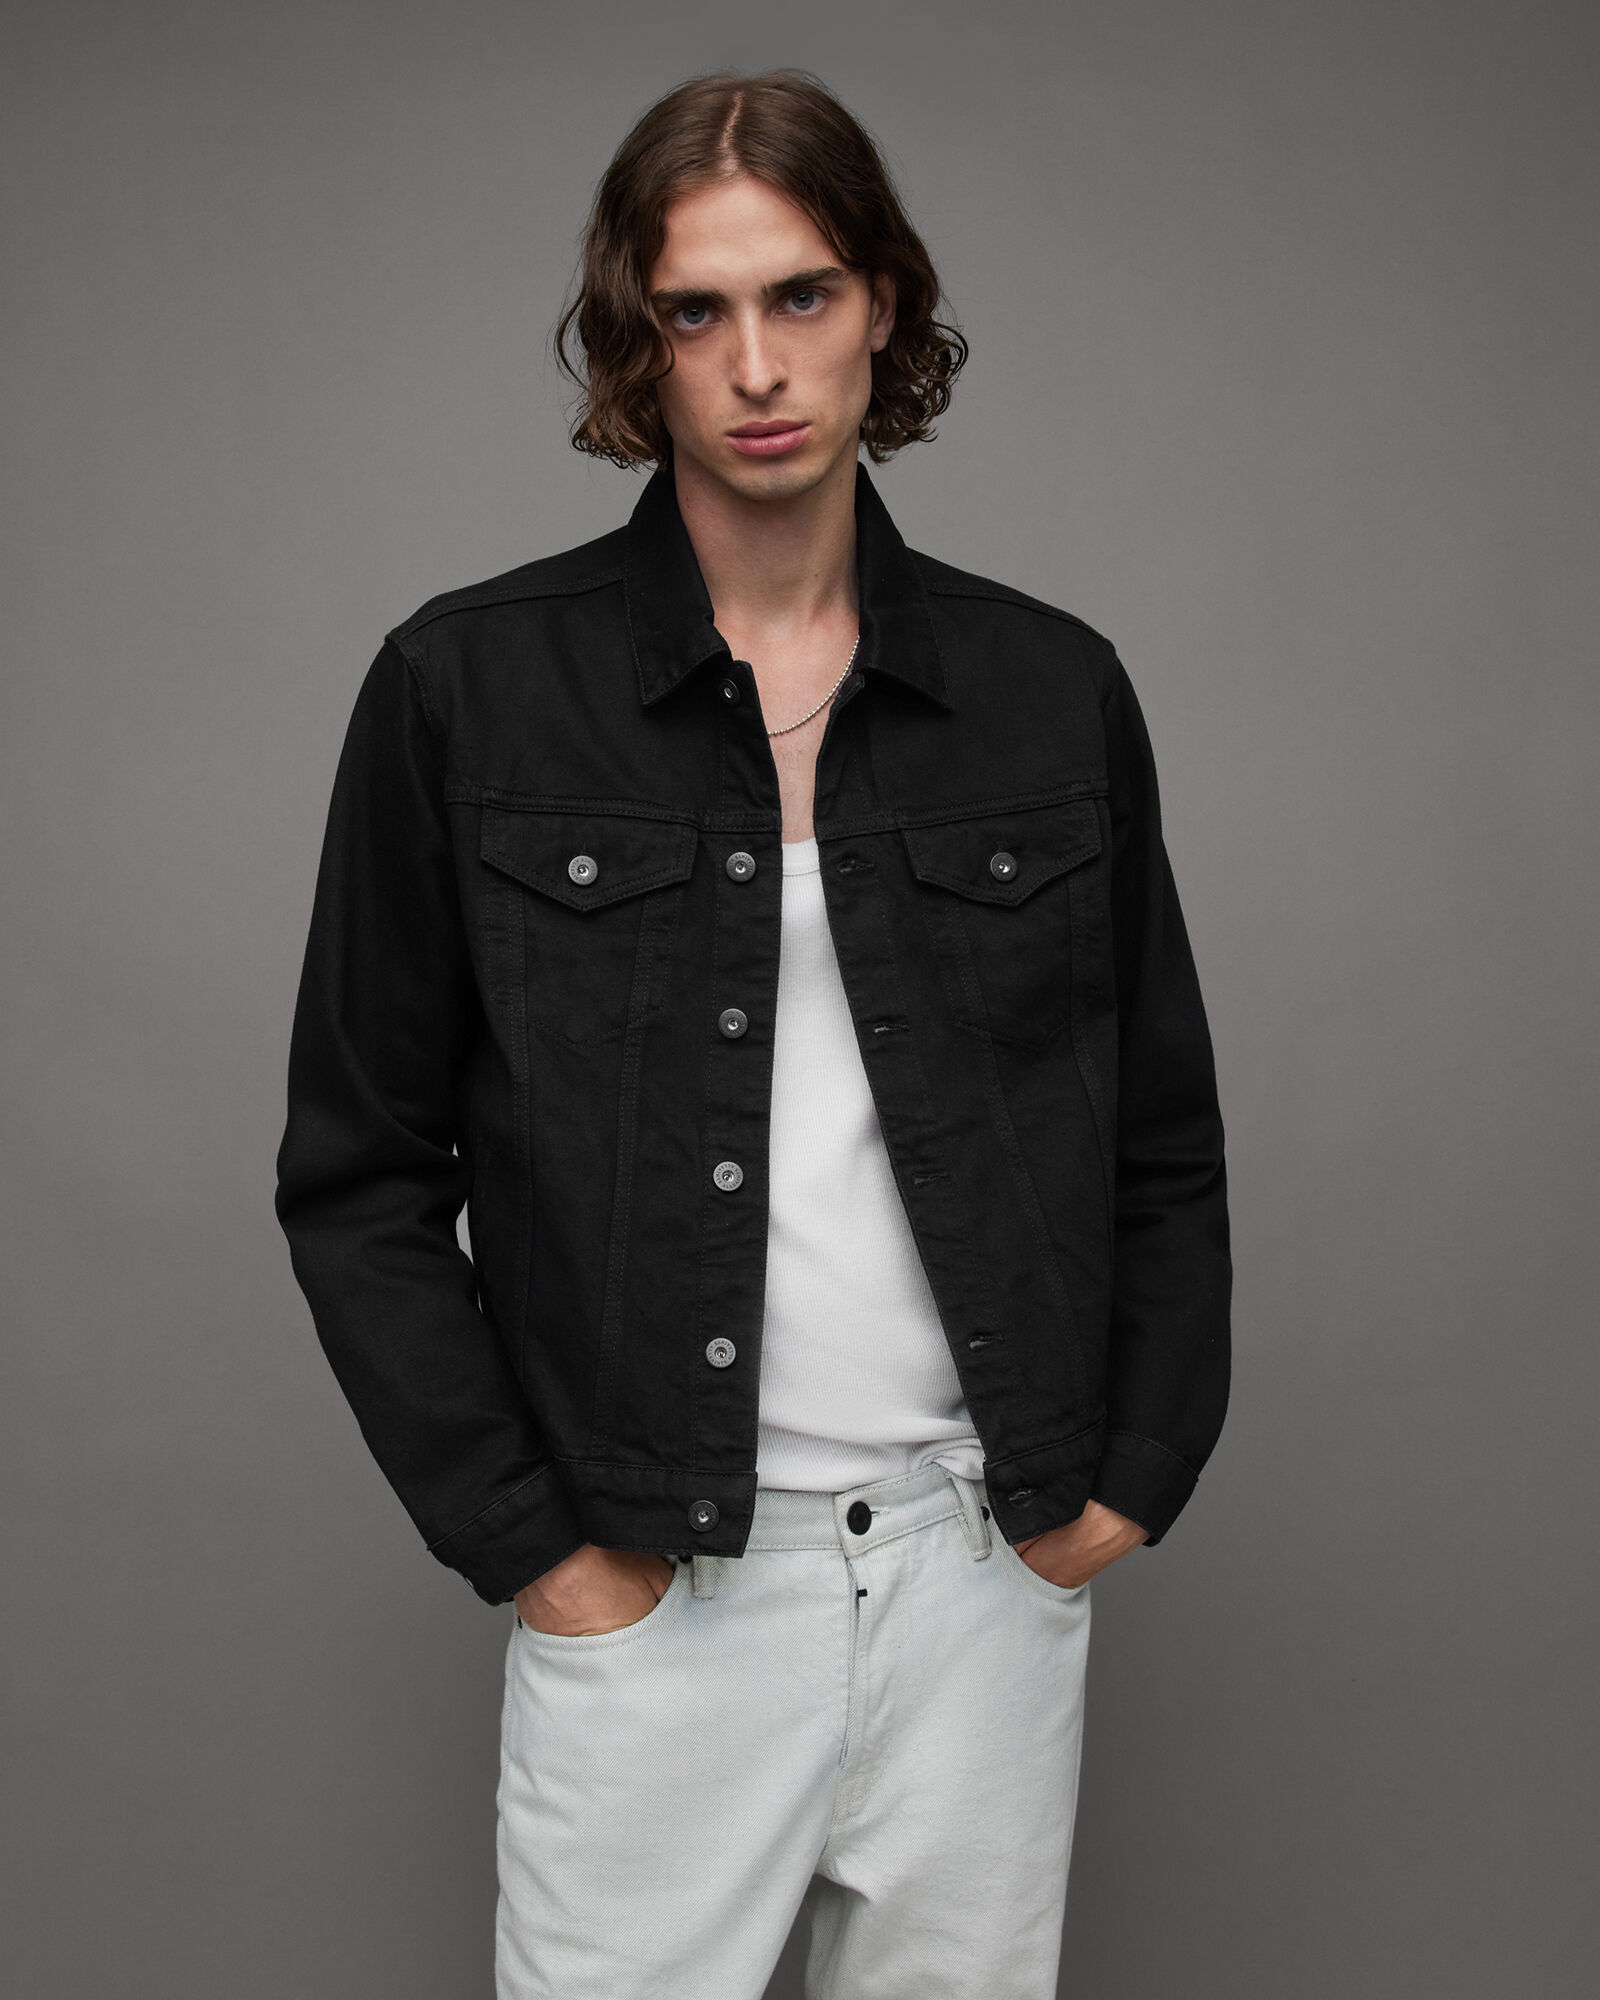 All Color Available Mens Black Denim Jacket at Best Price in Mumbai | Gods  Eye Clothing Llp